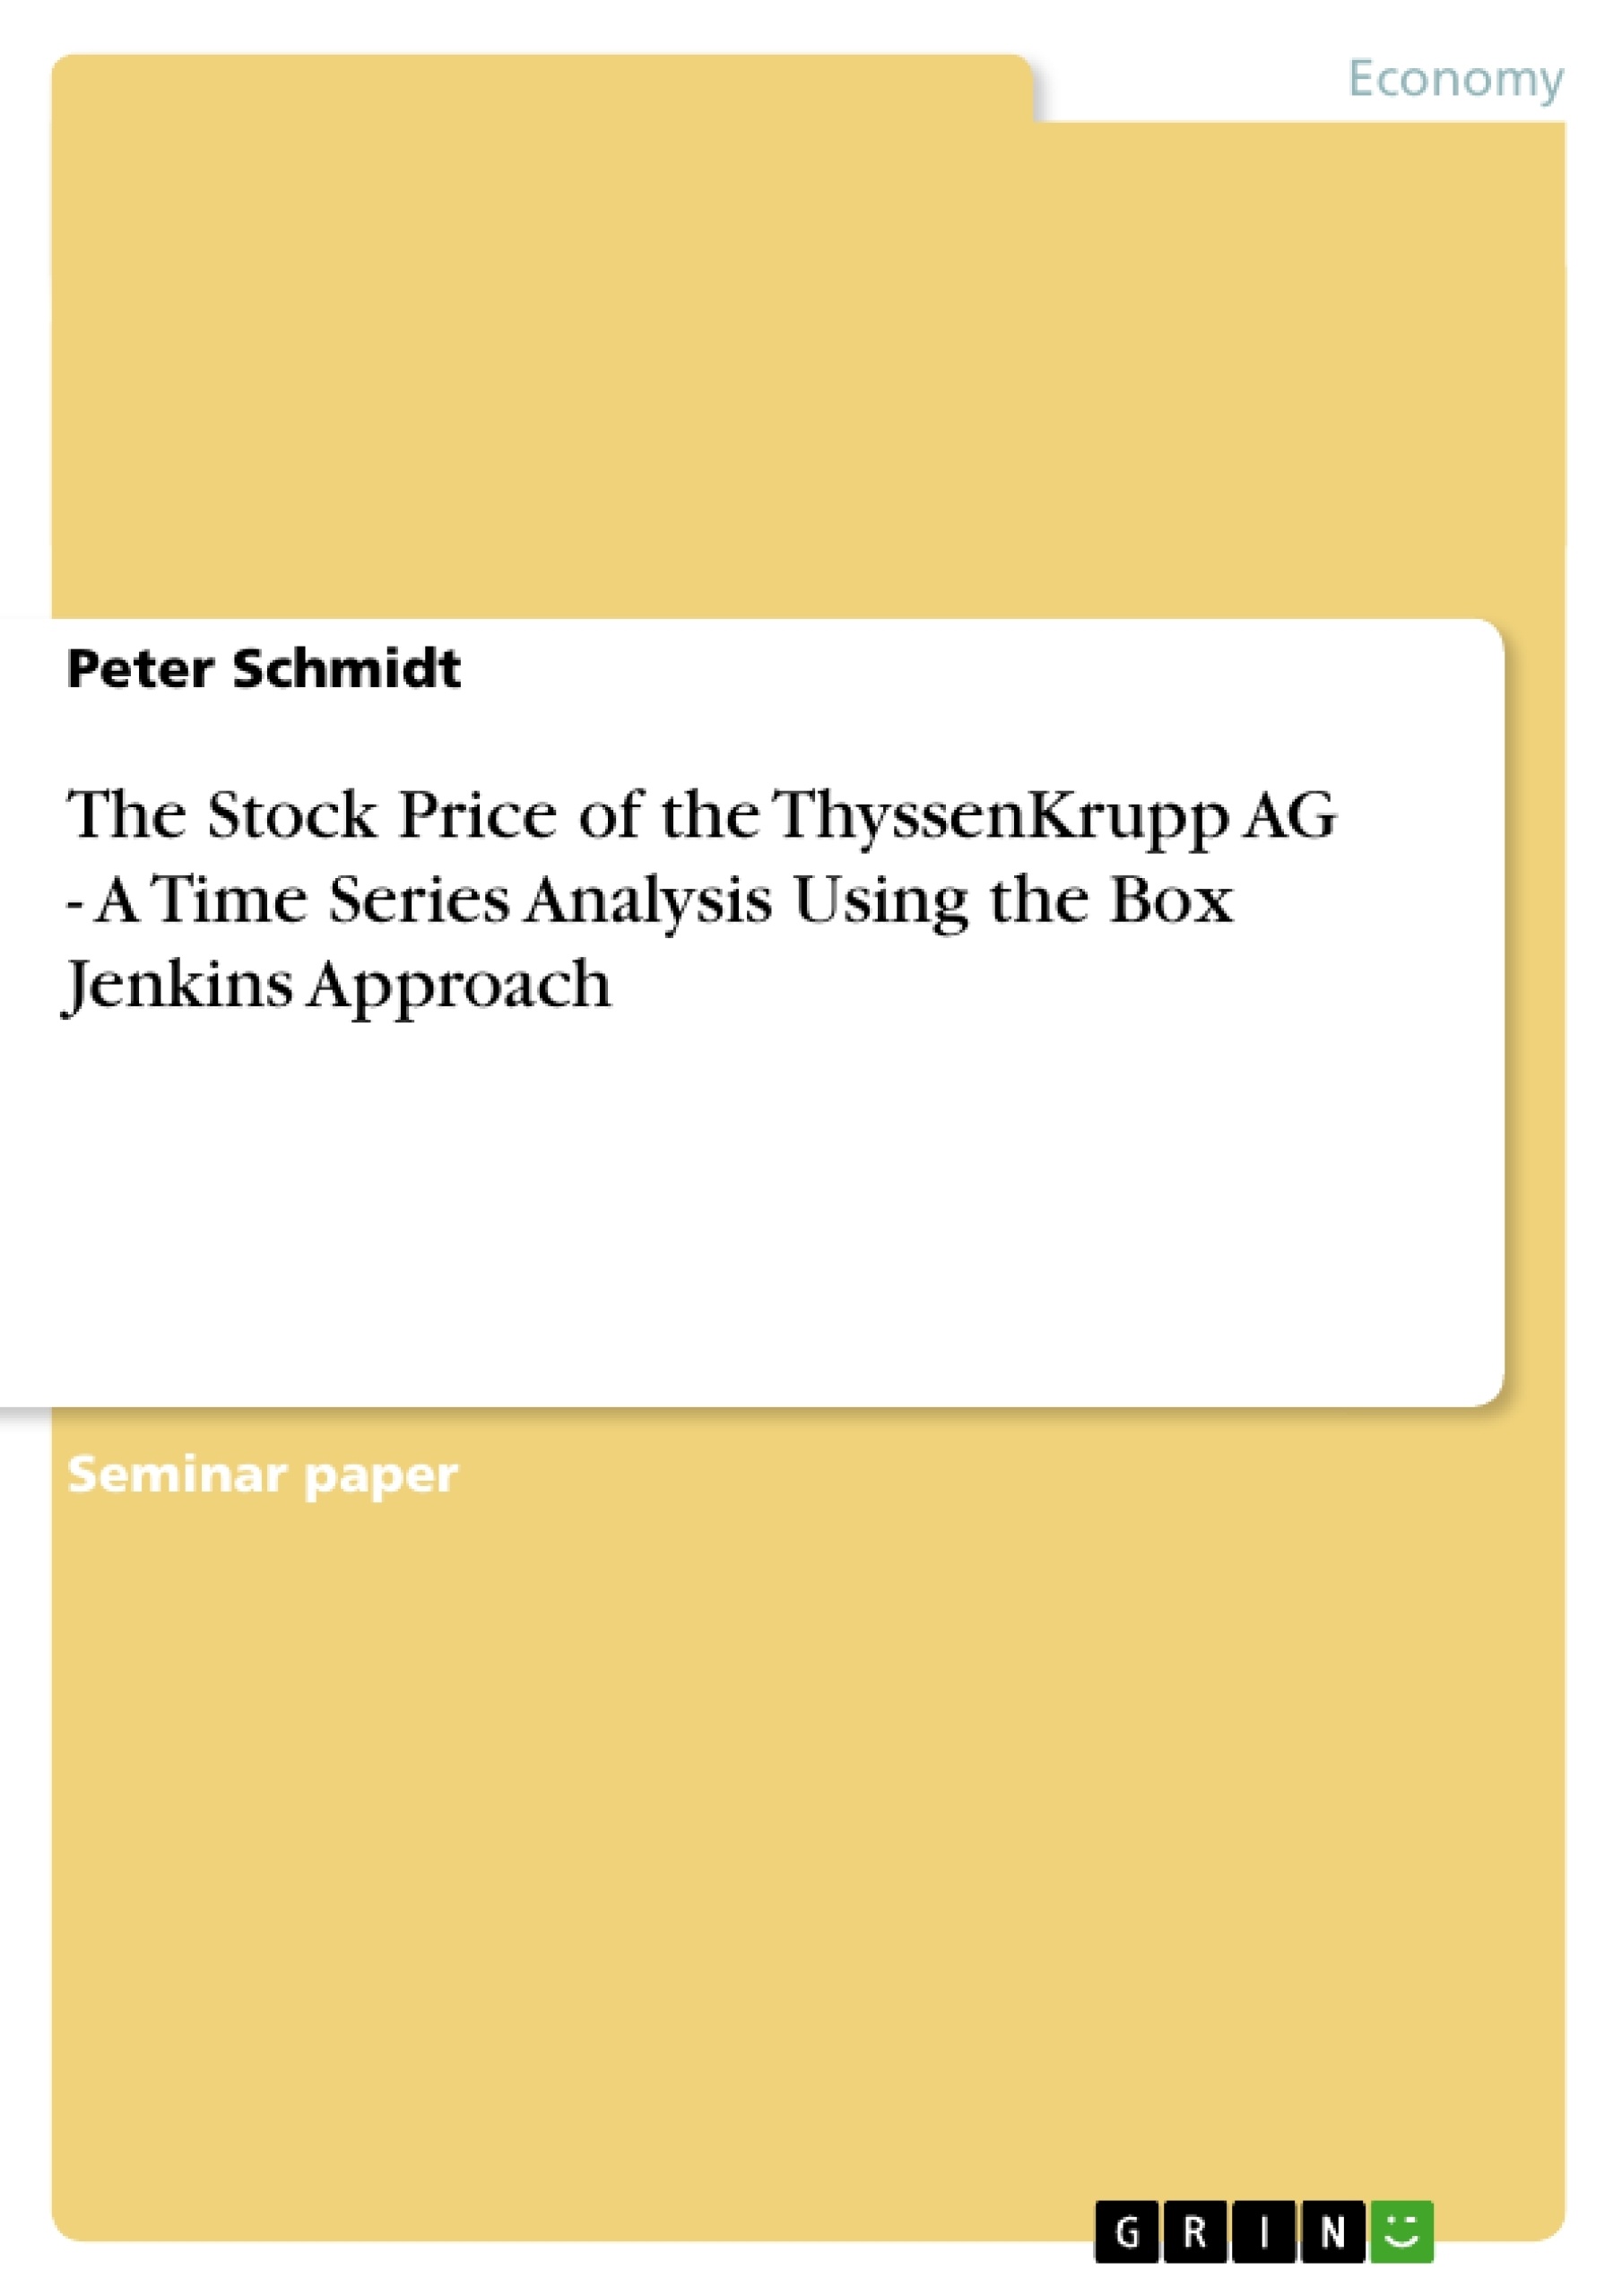 Título: The Stock Price of the ThyssenKrupp AG - A Time Series Analysis Using the Box Jenkins Approach